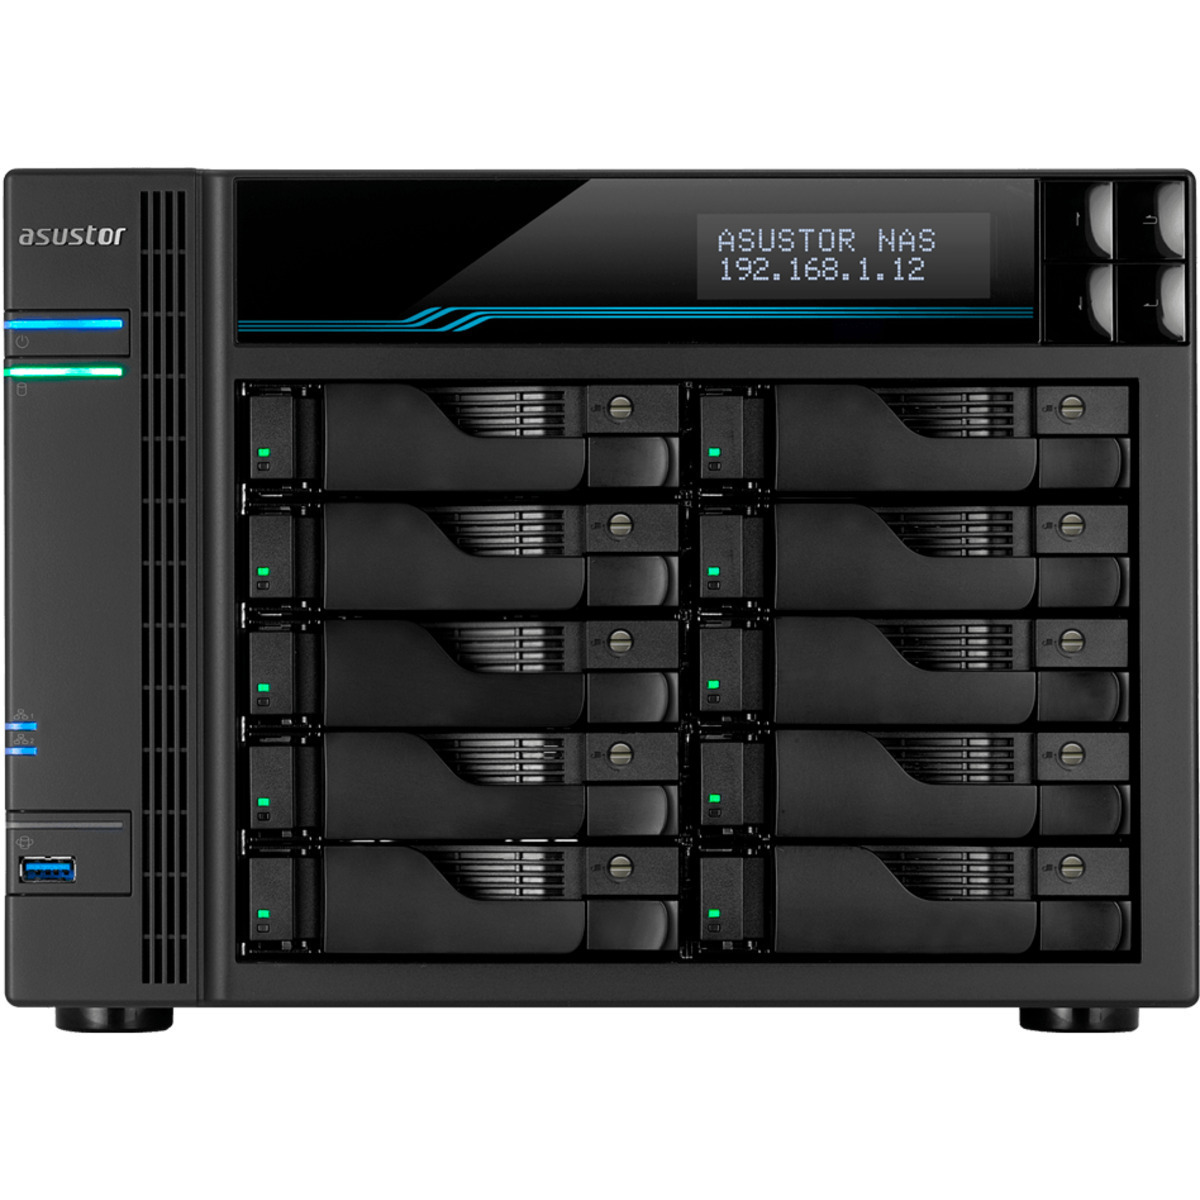 ASUSTOR AS6510T Lockerstor 10 80tb 10-Bay Desktop Multimedia / Power User / Business NAS - Network Attached Storage Device 10x8tb Seagate IronWolf Pro ST8000NT001 3.5 7200rpm SATA 6Gb/s HDD NAS Class Drives Installed - Burn-In Tested - ON SALE - FREE RAM UPGRADE AS6510T Lockerstor 10